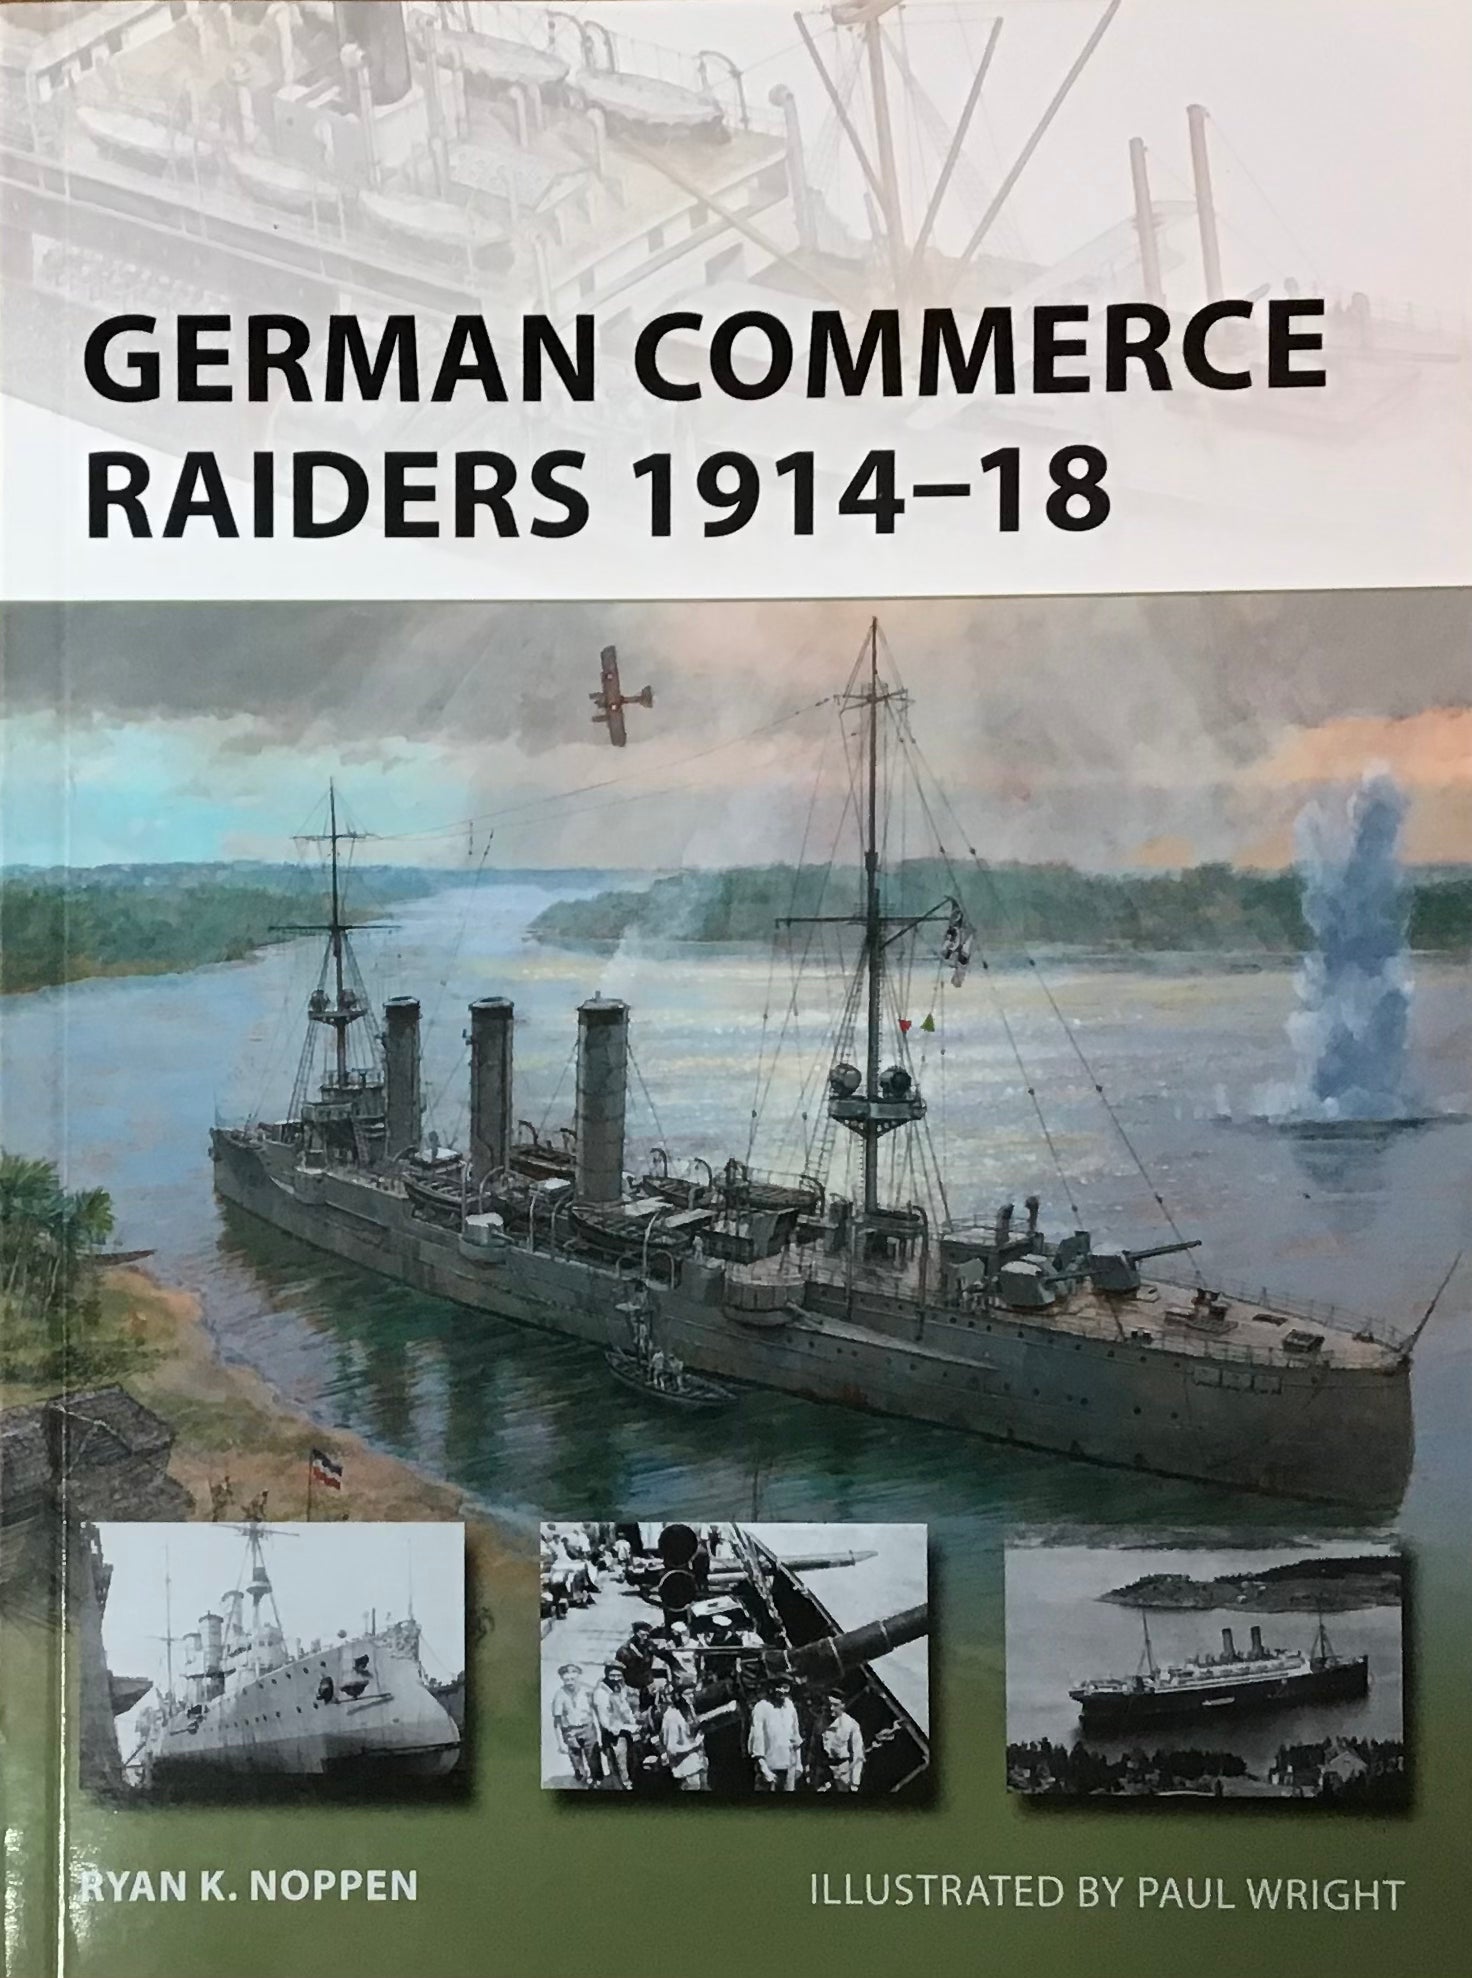 German Commerce Raiders 1914-18 by Ryan K. Noppen and Paul Wright - Chester Model Centre